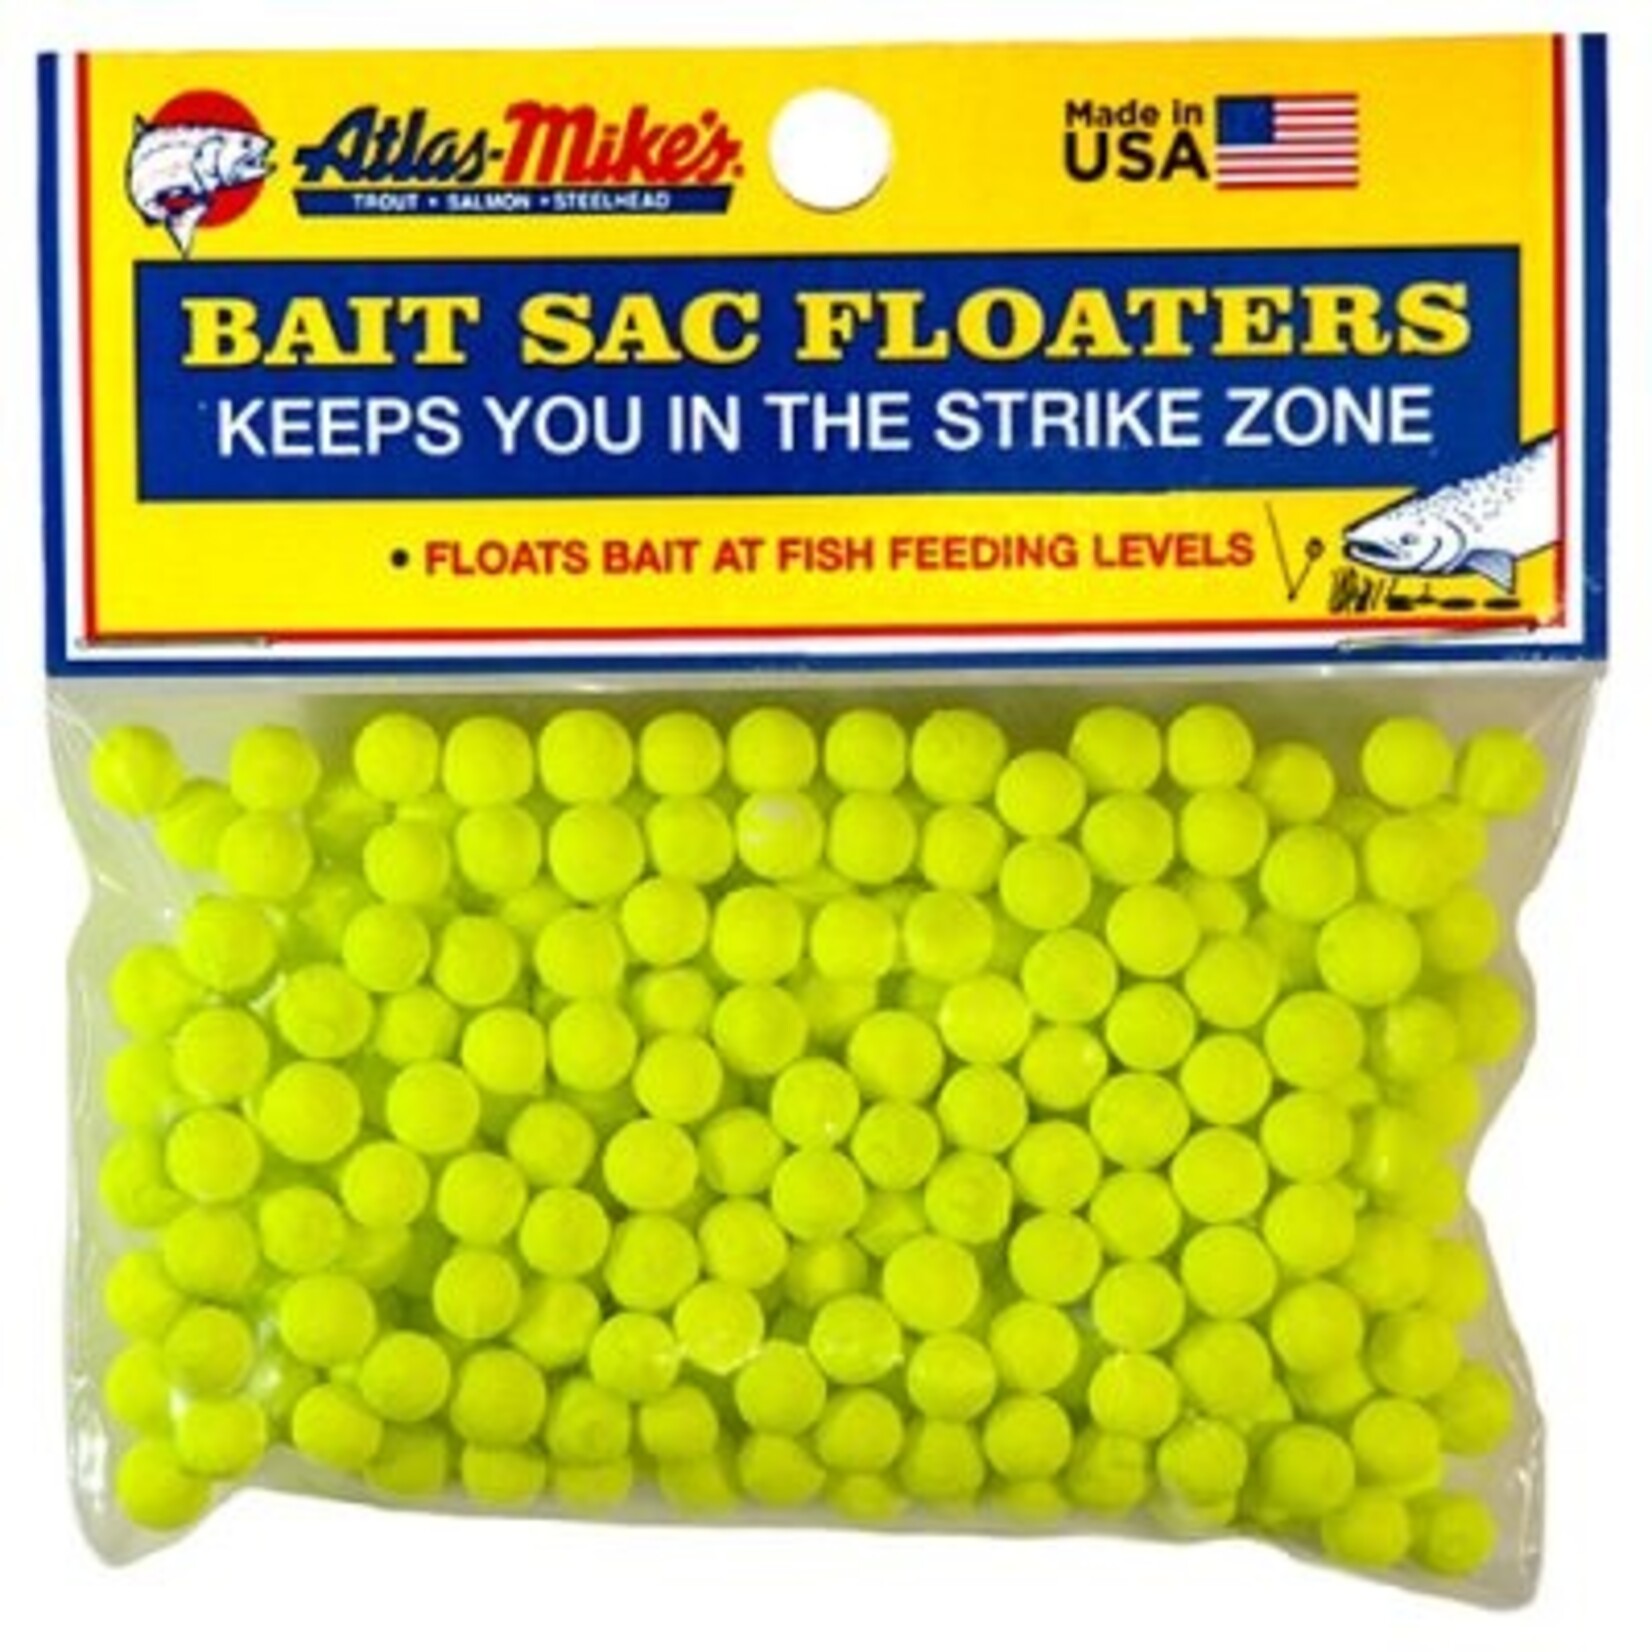 Atlas-Mike's ATLAS MIKES SAC FLOATERS